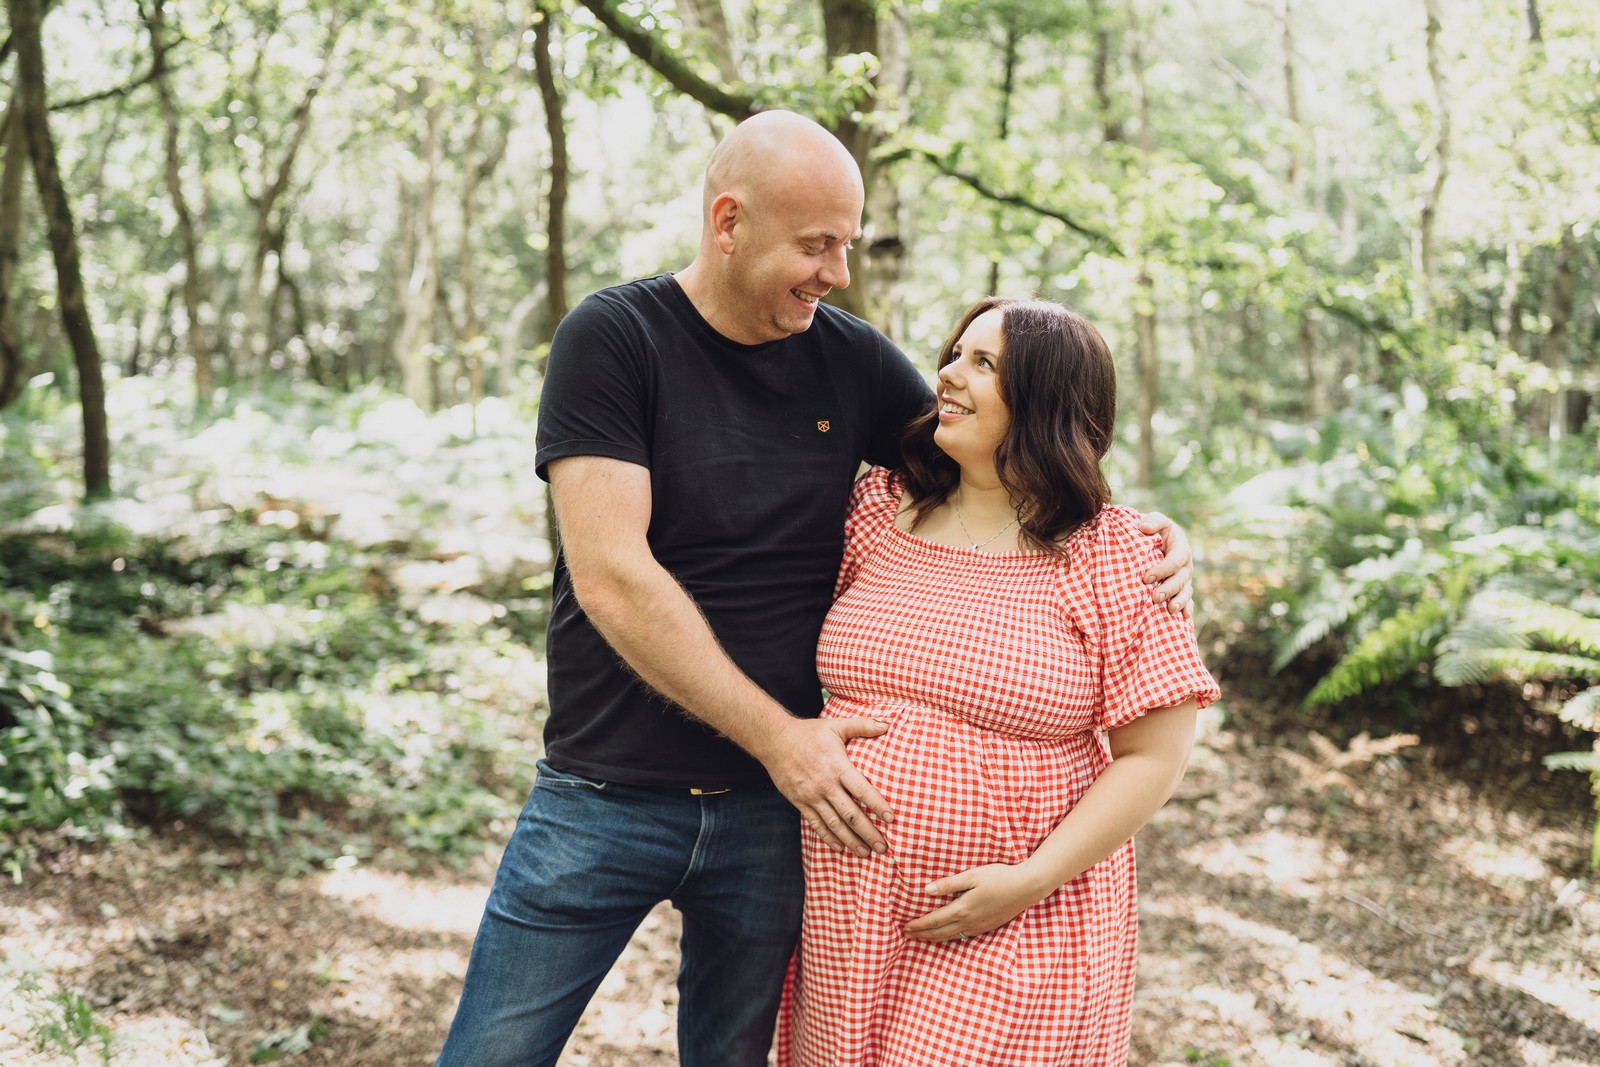 A maternity shoot in the woods // Charlotte